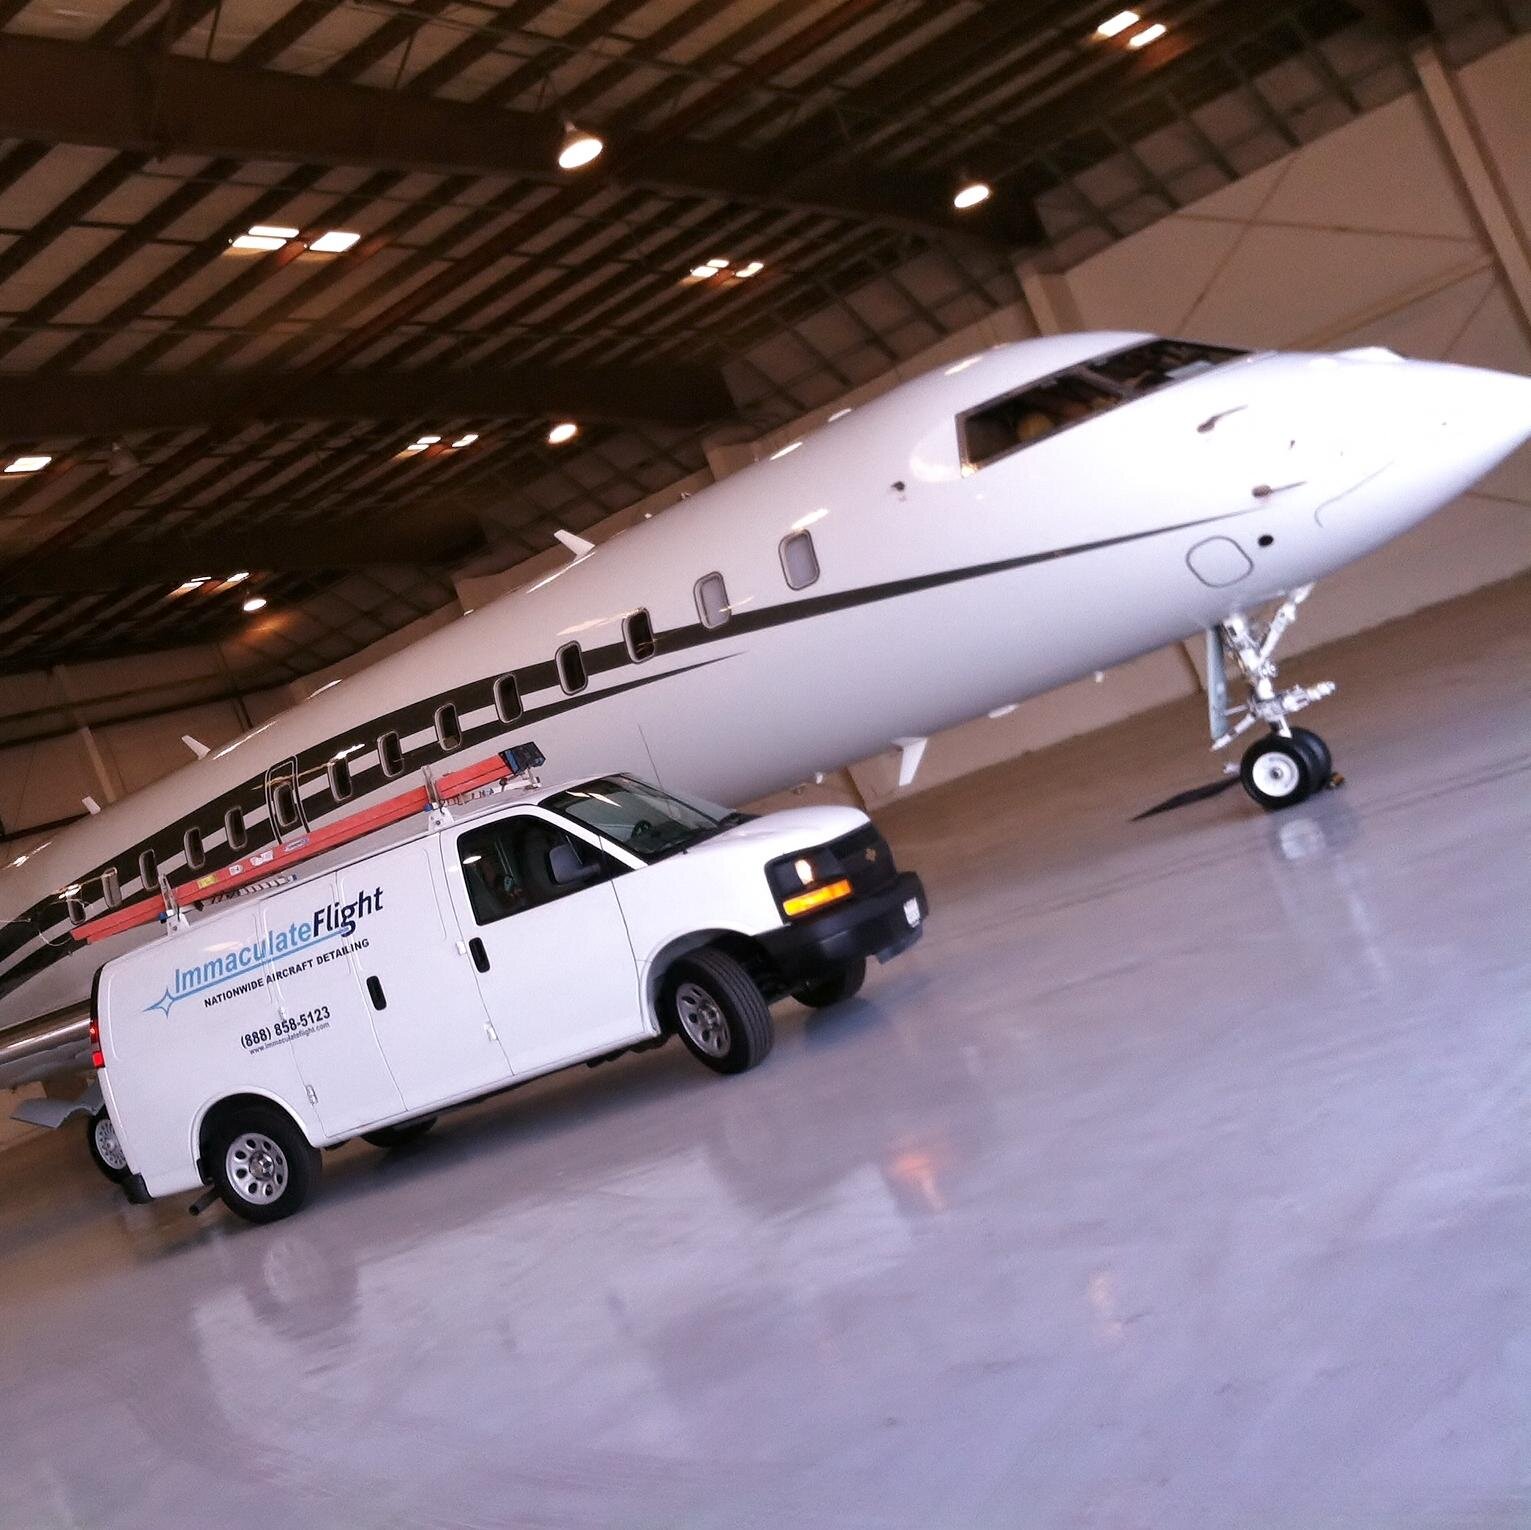 Nationwide Aircraft Cleaning & Detailing company located in 13 states and over 115+ airports in the US.